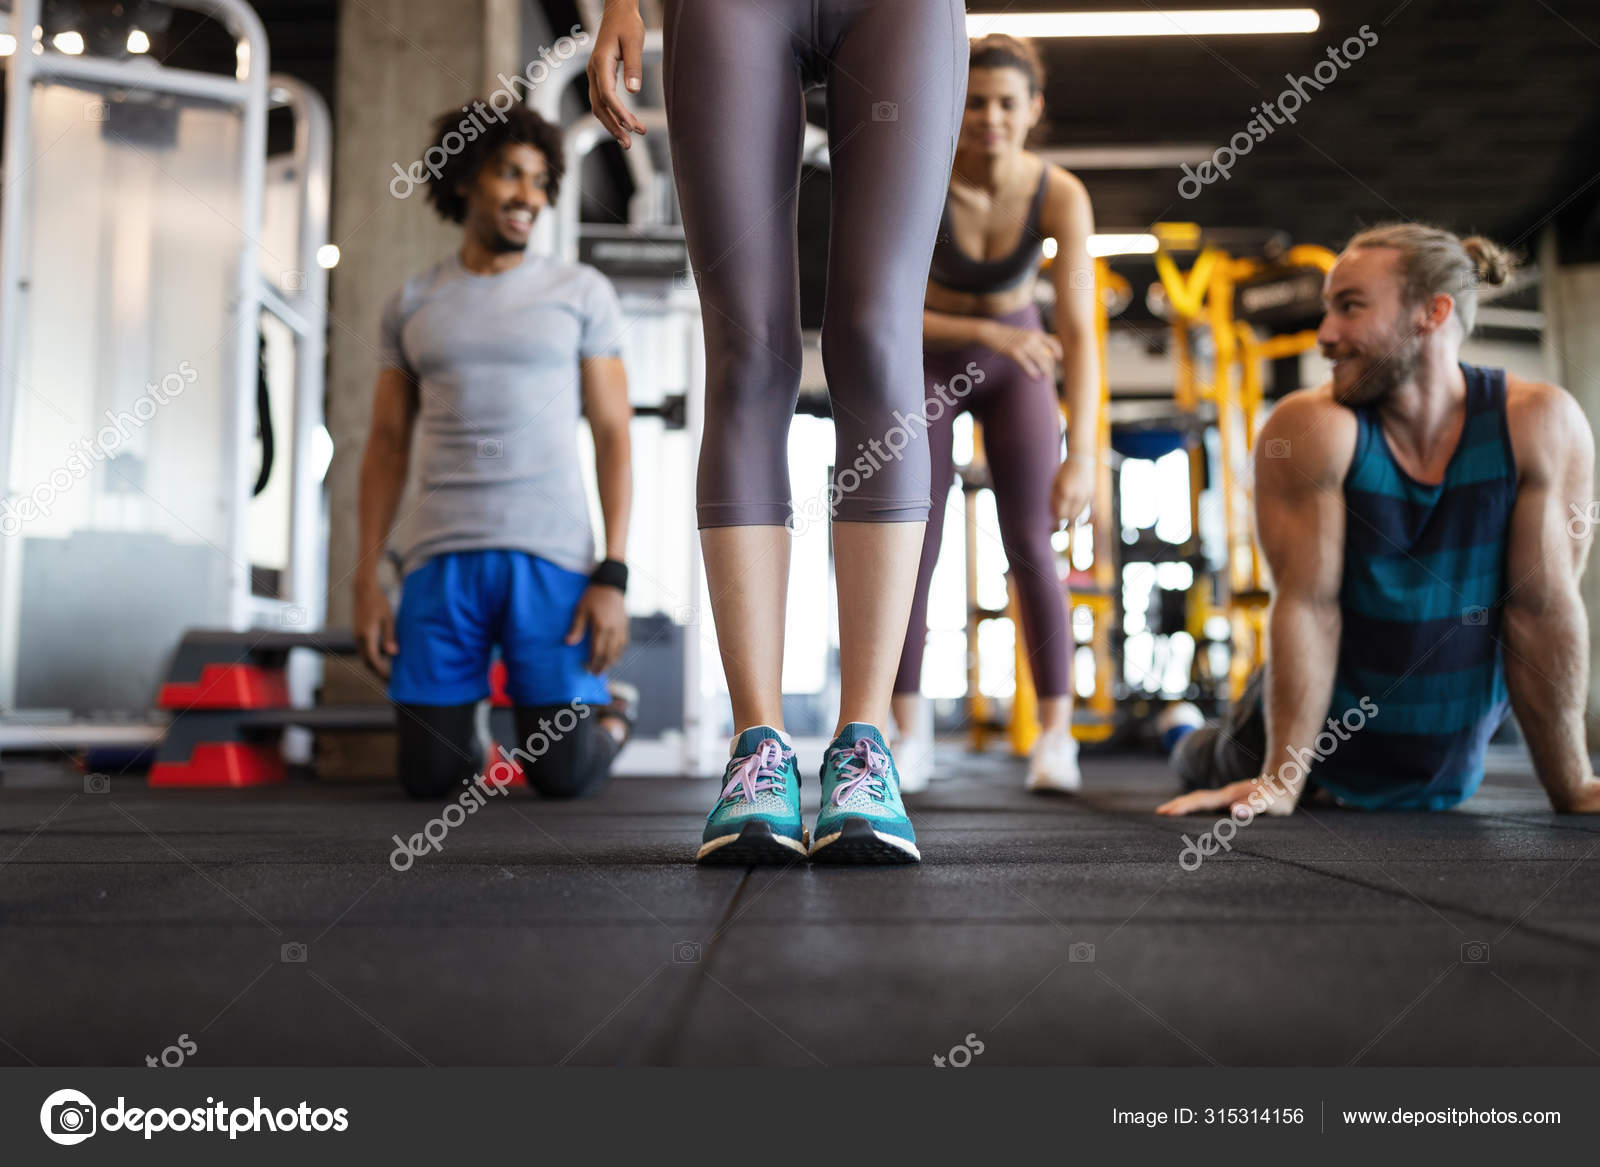 Fitness Sport Training Lifestyle Concept Group Fit People